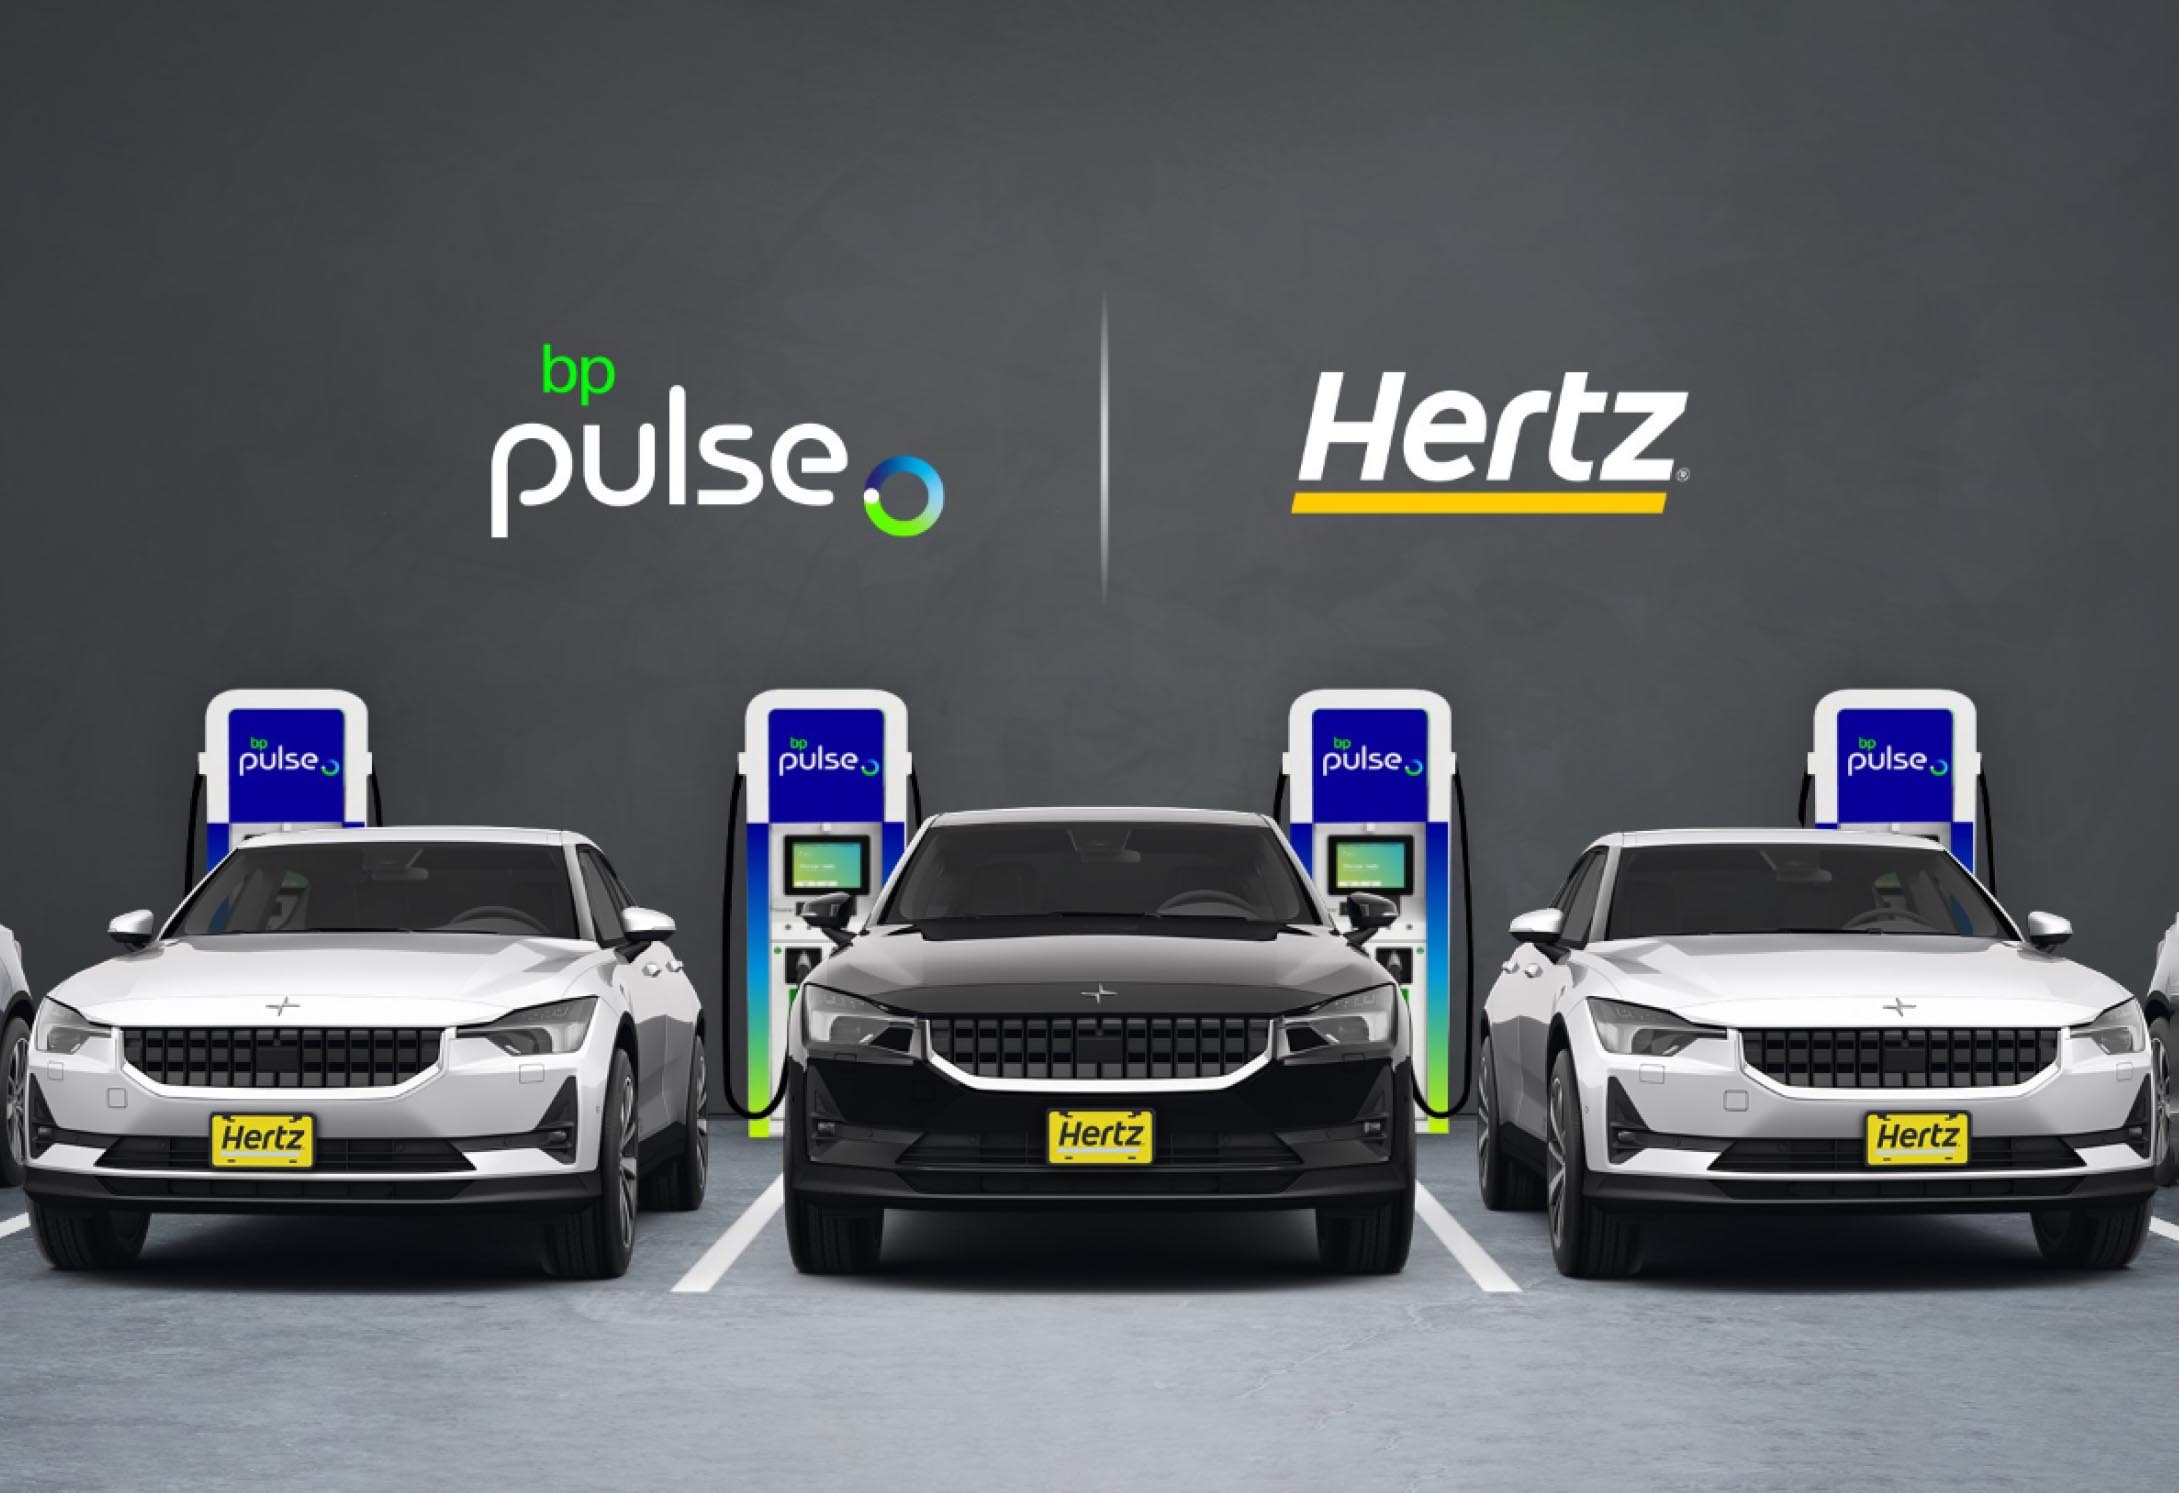 bp and Hertz to develop U.S. network of EV charging stations